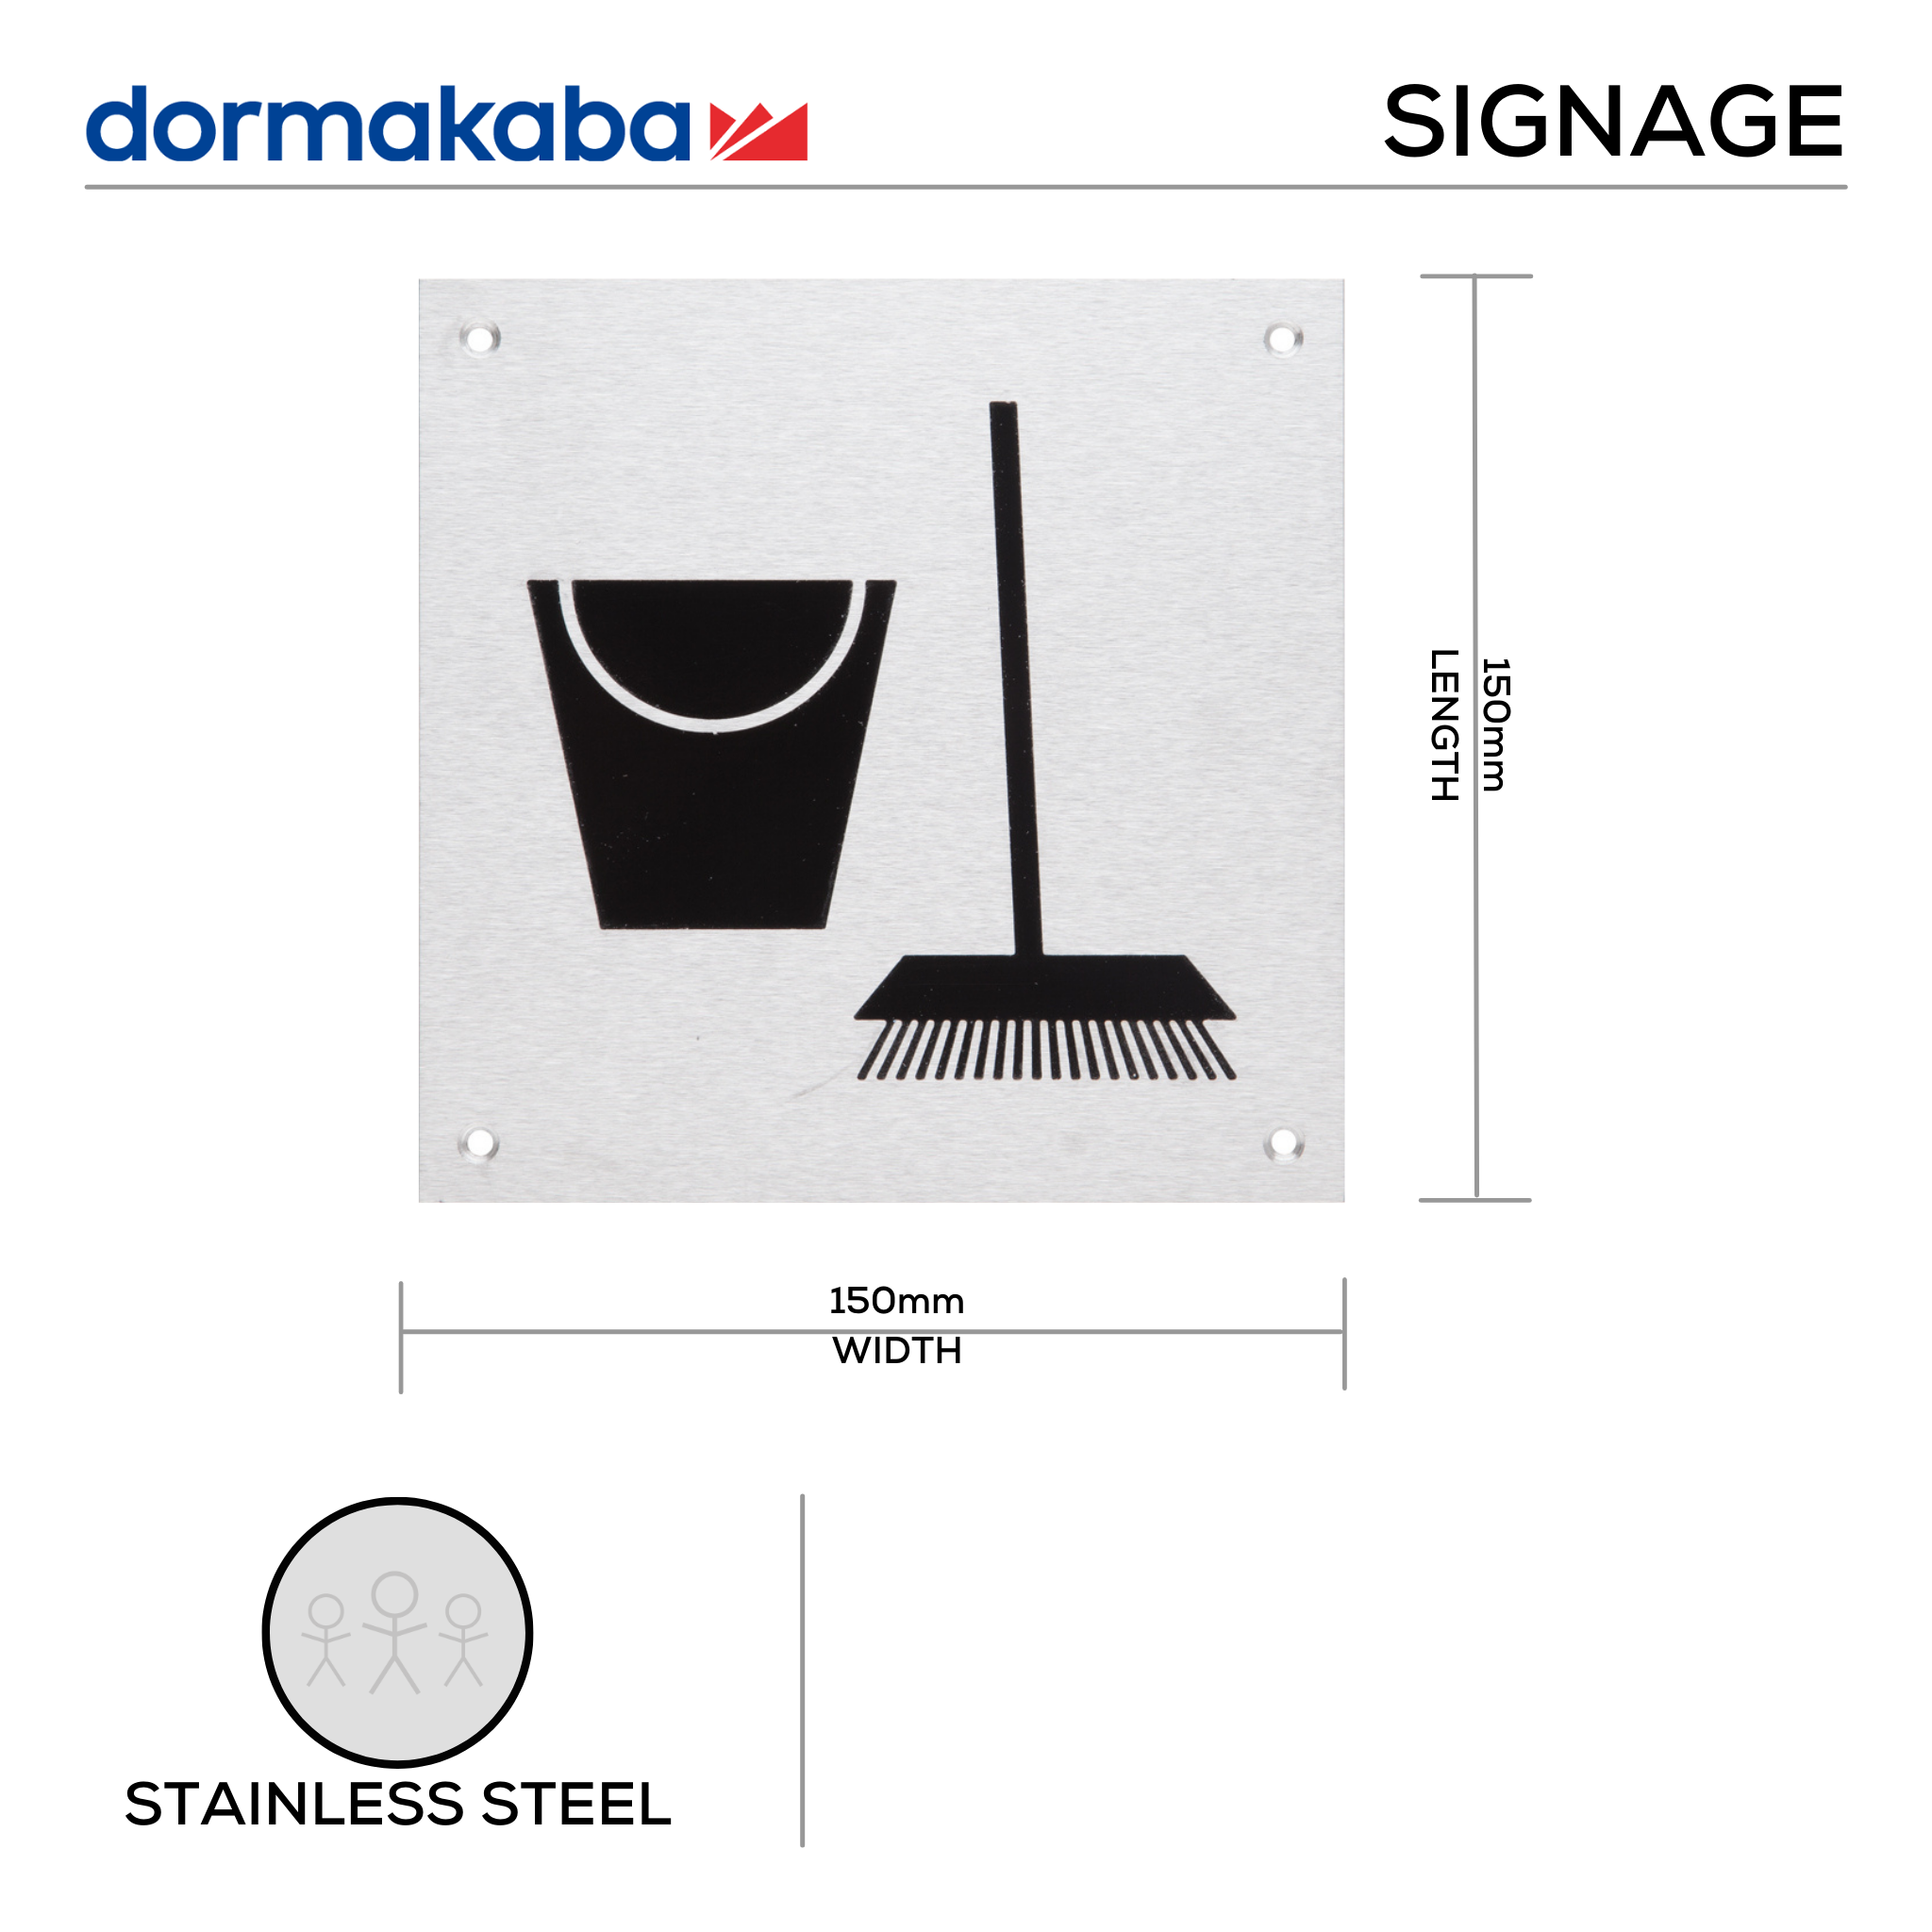 DSS-138, Door Signage, Cleaner , 150mm (l), 150mm (w), 1,2mm (t), Stainless Steel, DORMAKABA